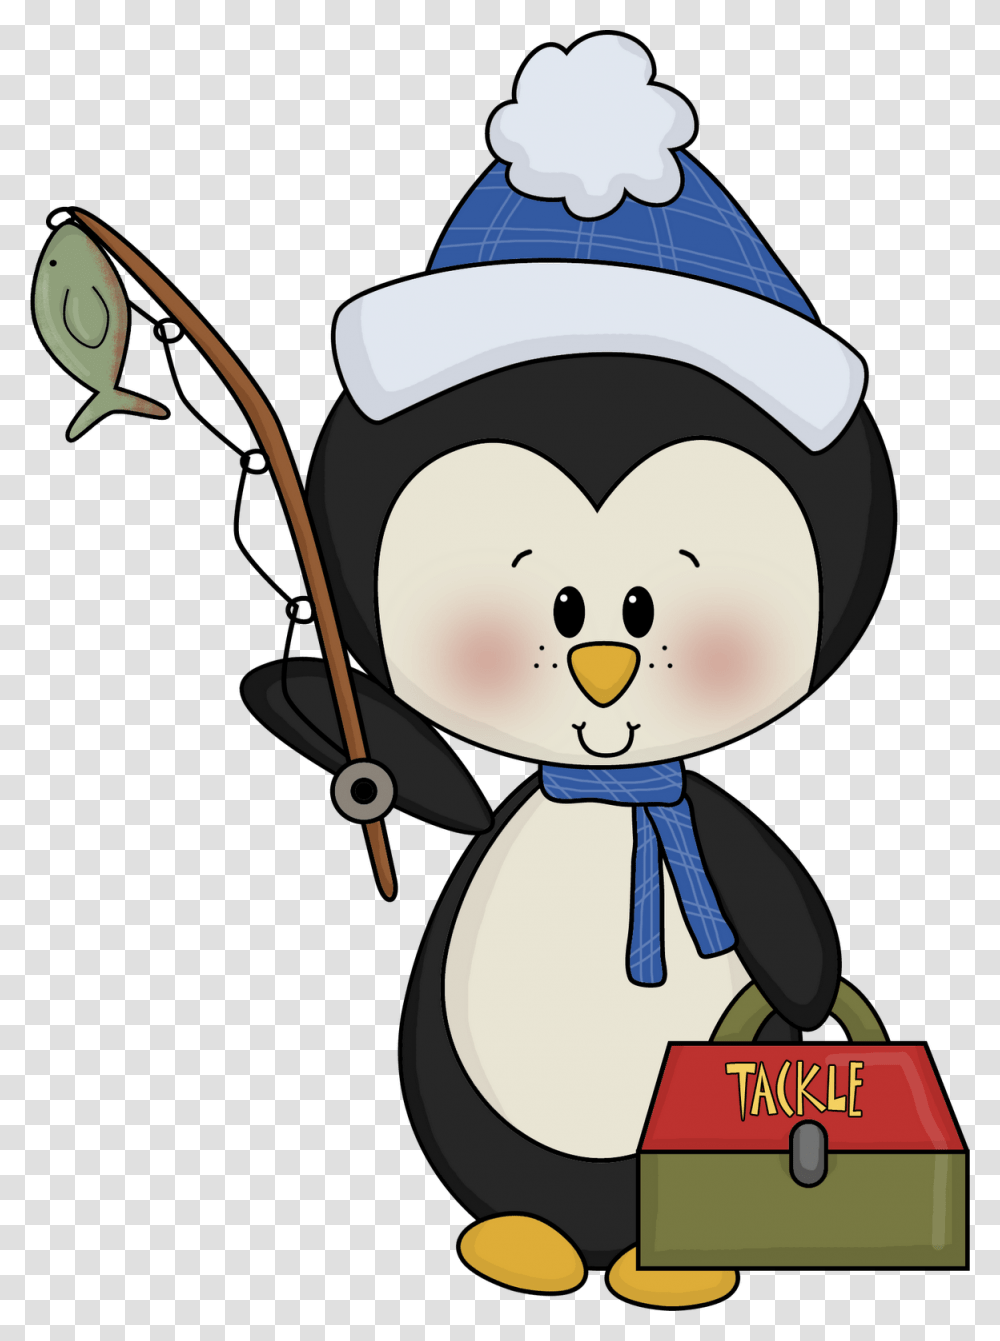 A Look At My Weekpenguins Shapes And I Love Labels Cartoon Funny Penguin Fishing Clipart, Elf, Chef, Snowman, Winter Transparent Png